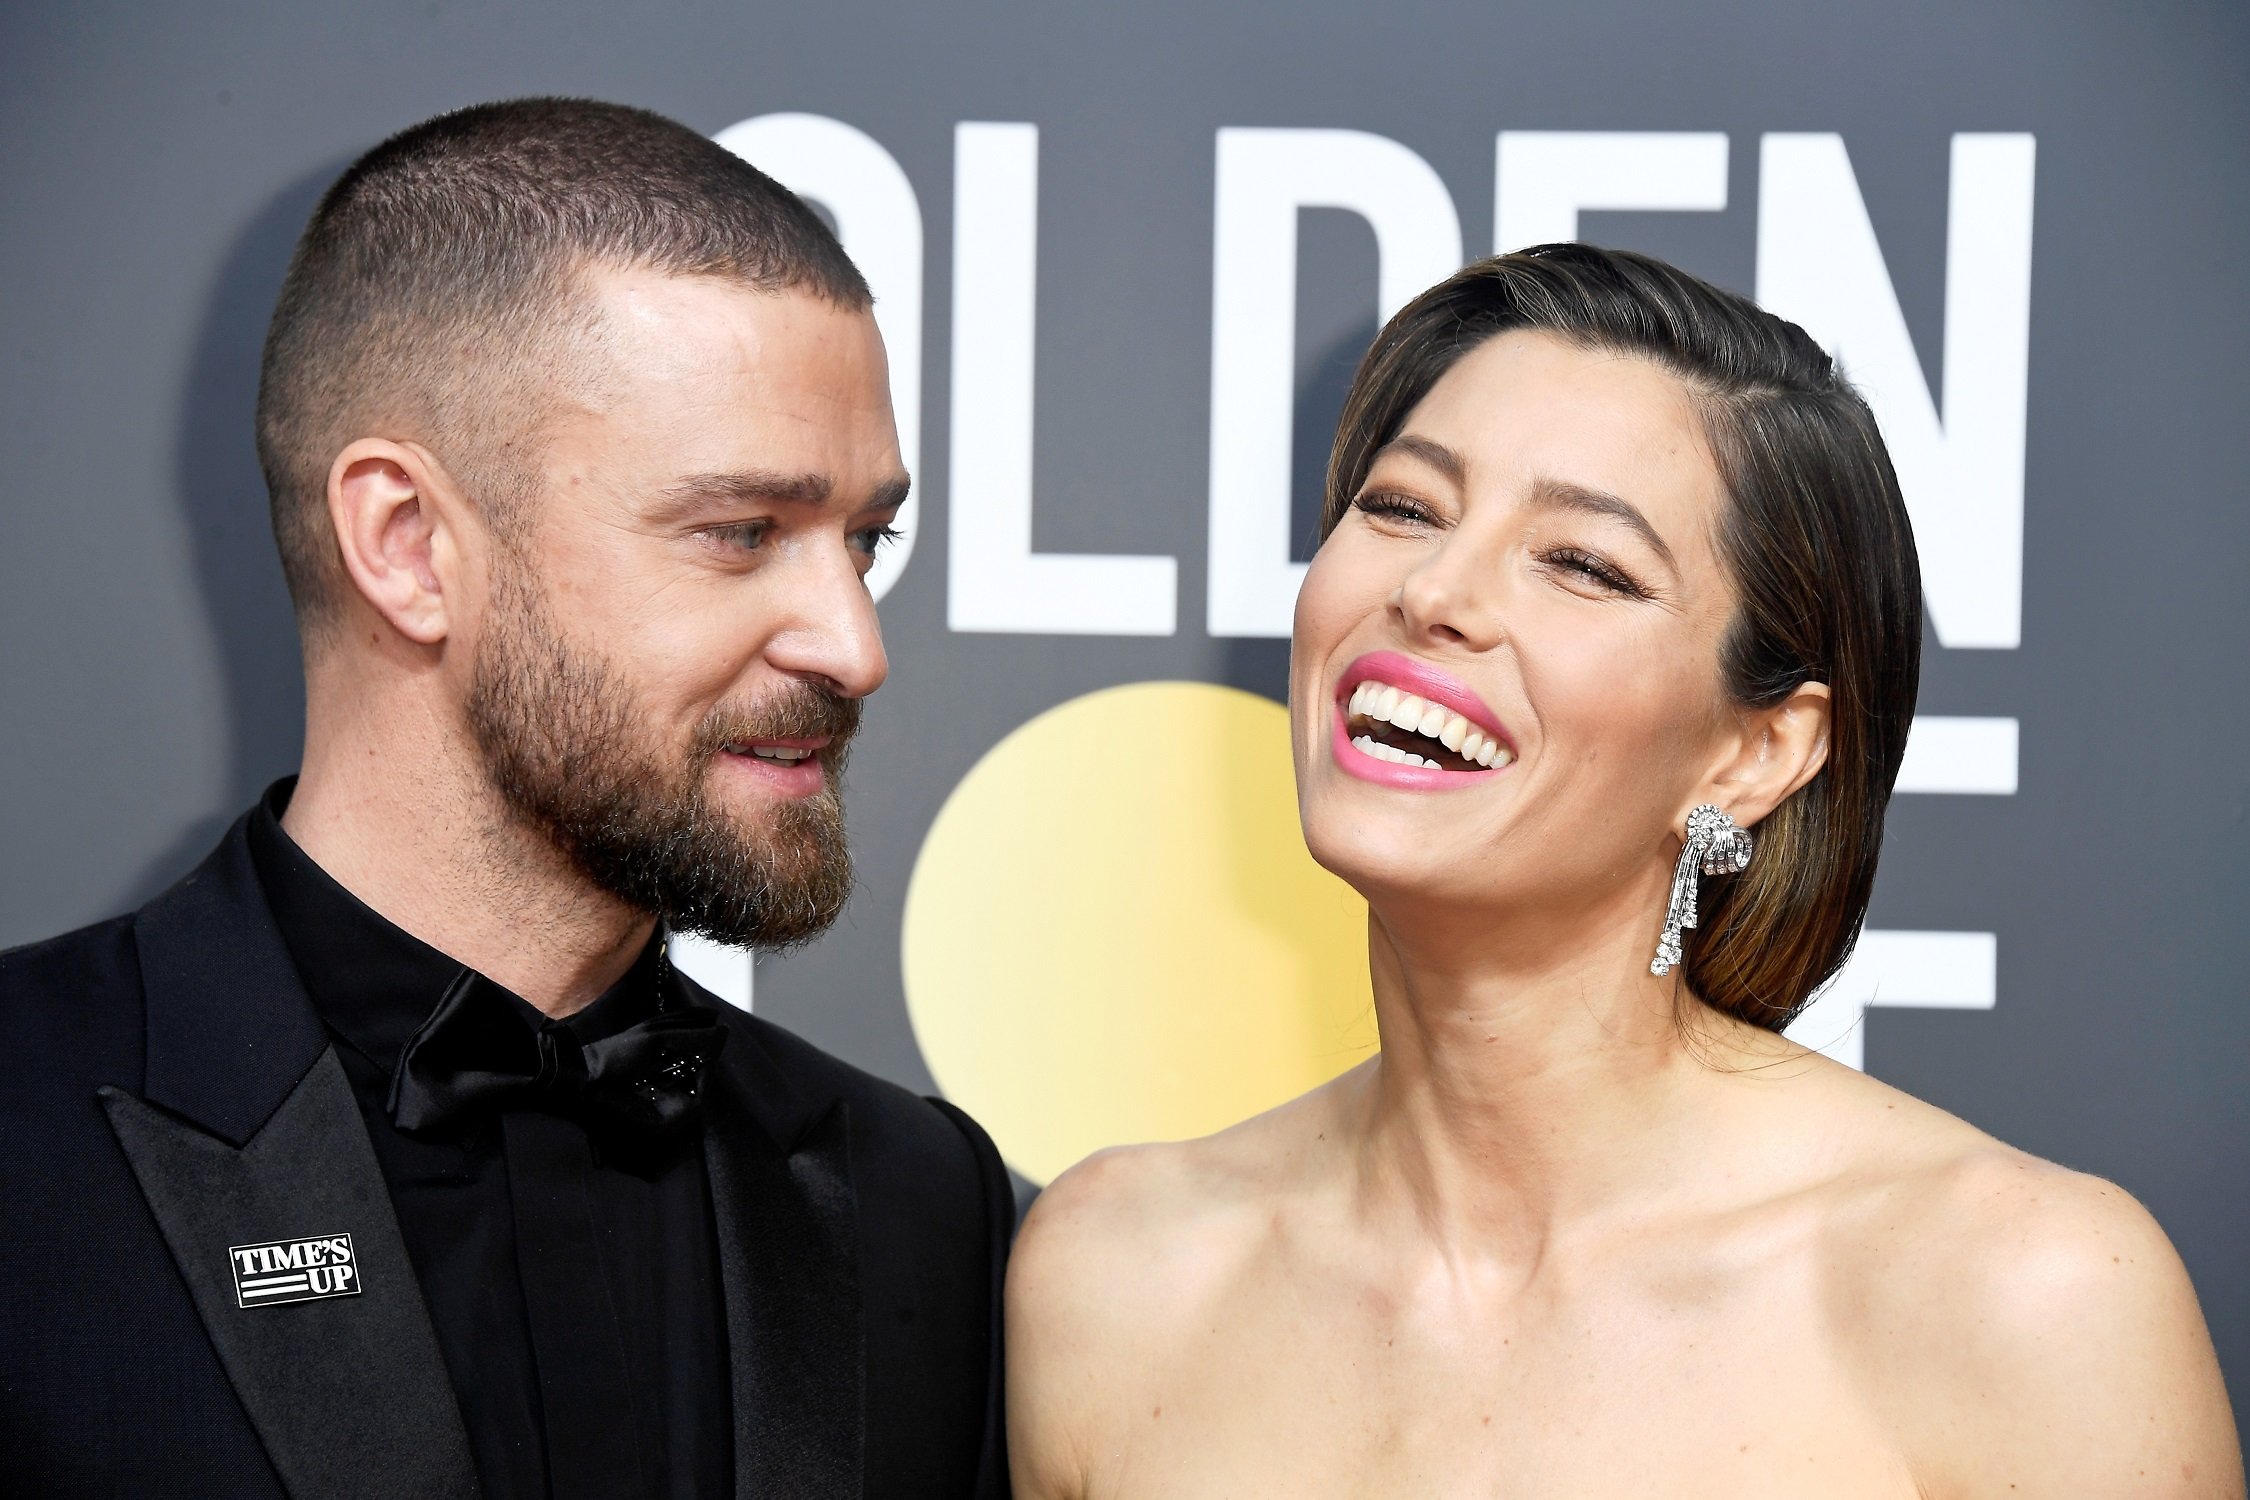 Justin Timberlake and Jessica Biel attend The 75th Annual Golden Globe Awards at The Beverly Hilton Hotel